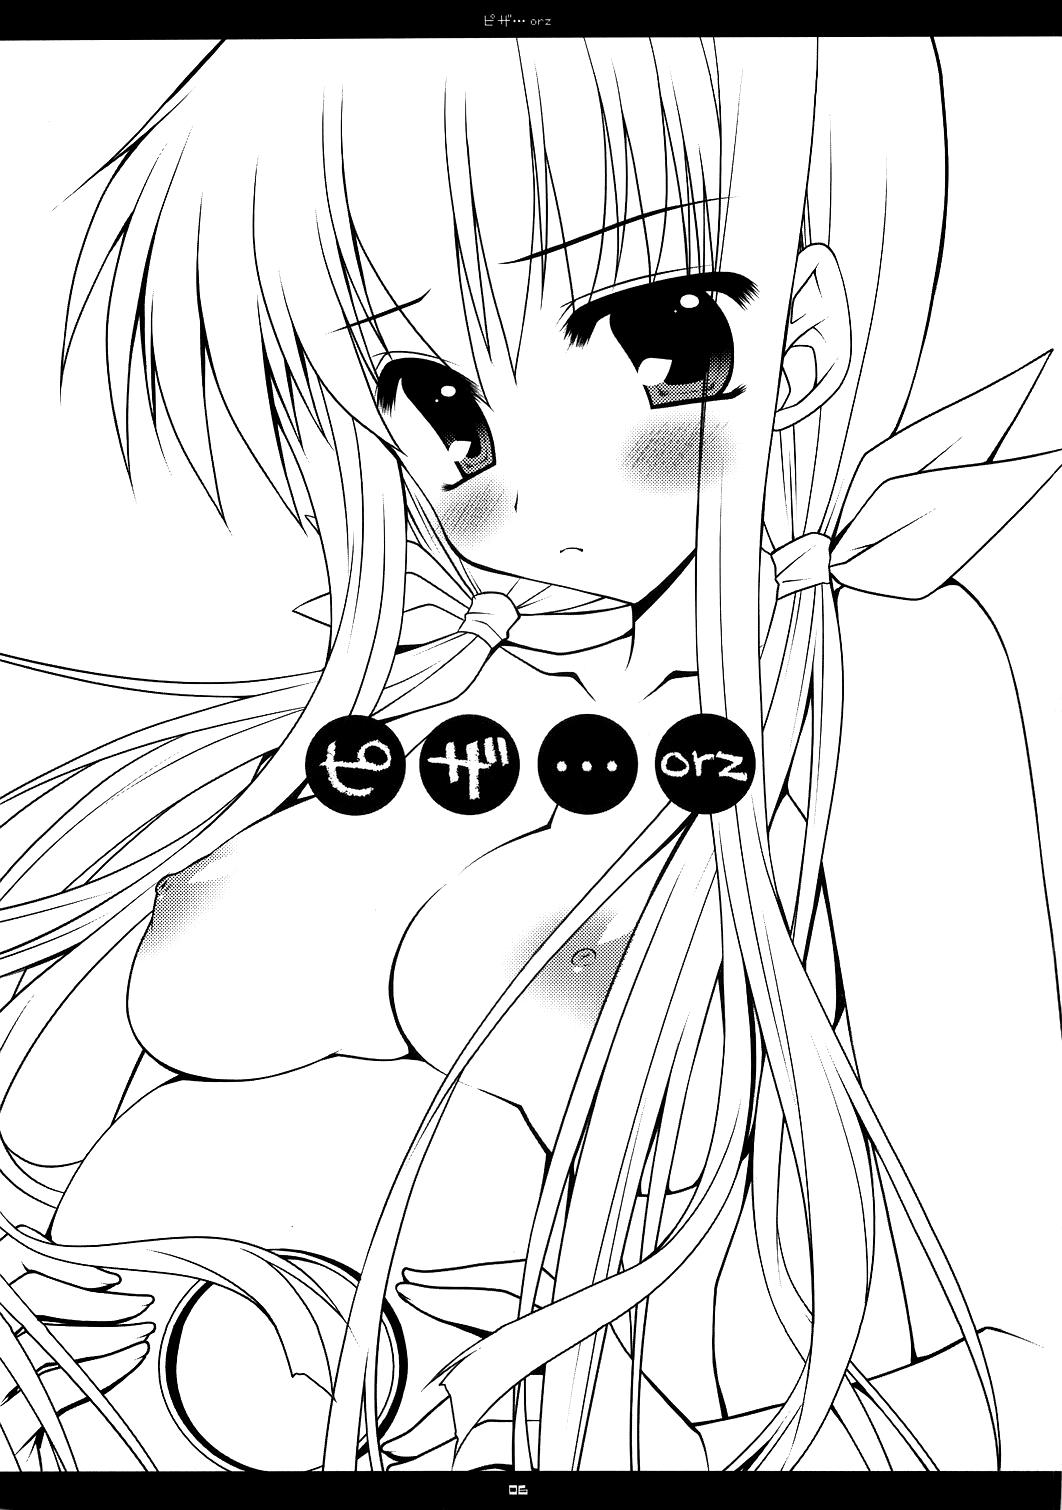 Longhair Pizza...orz - Code geass 18 Year Old - Page 4